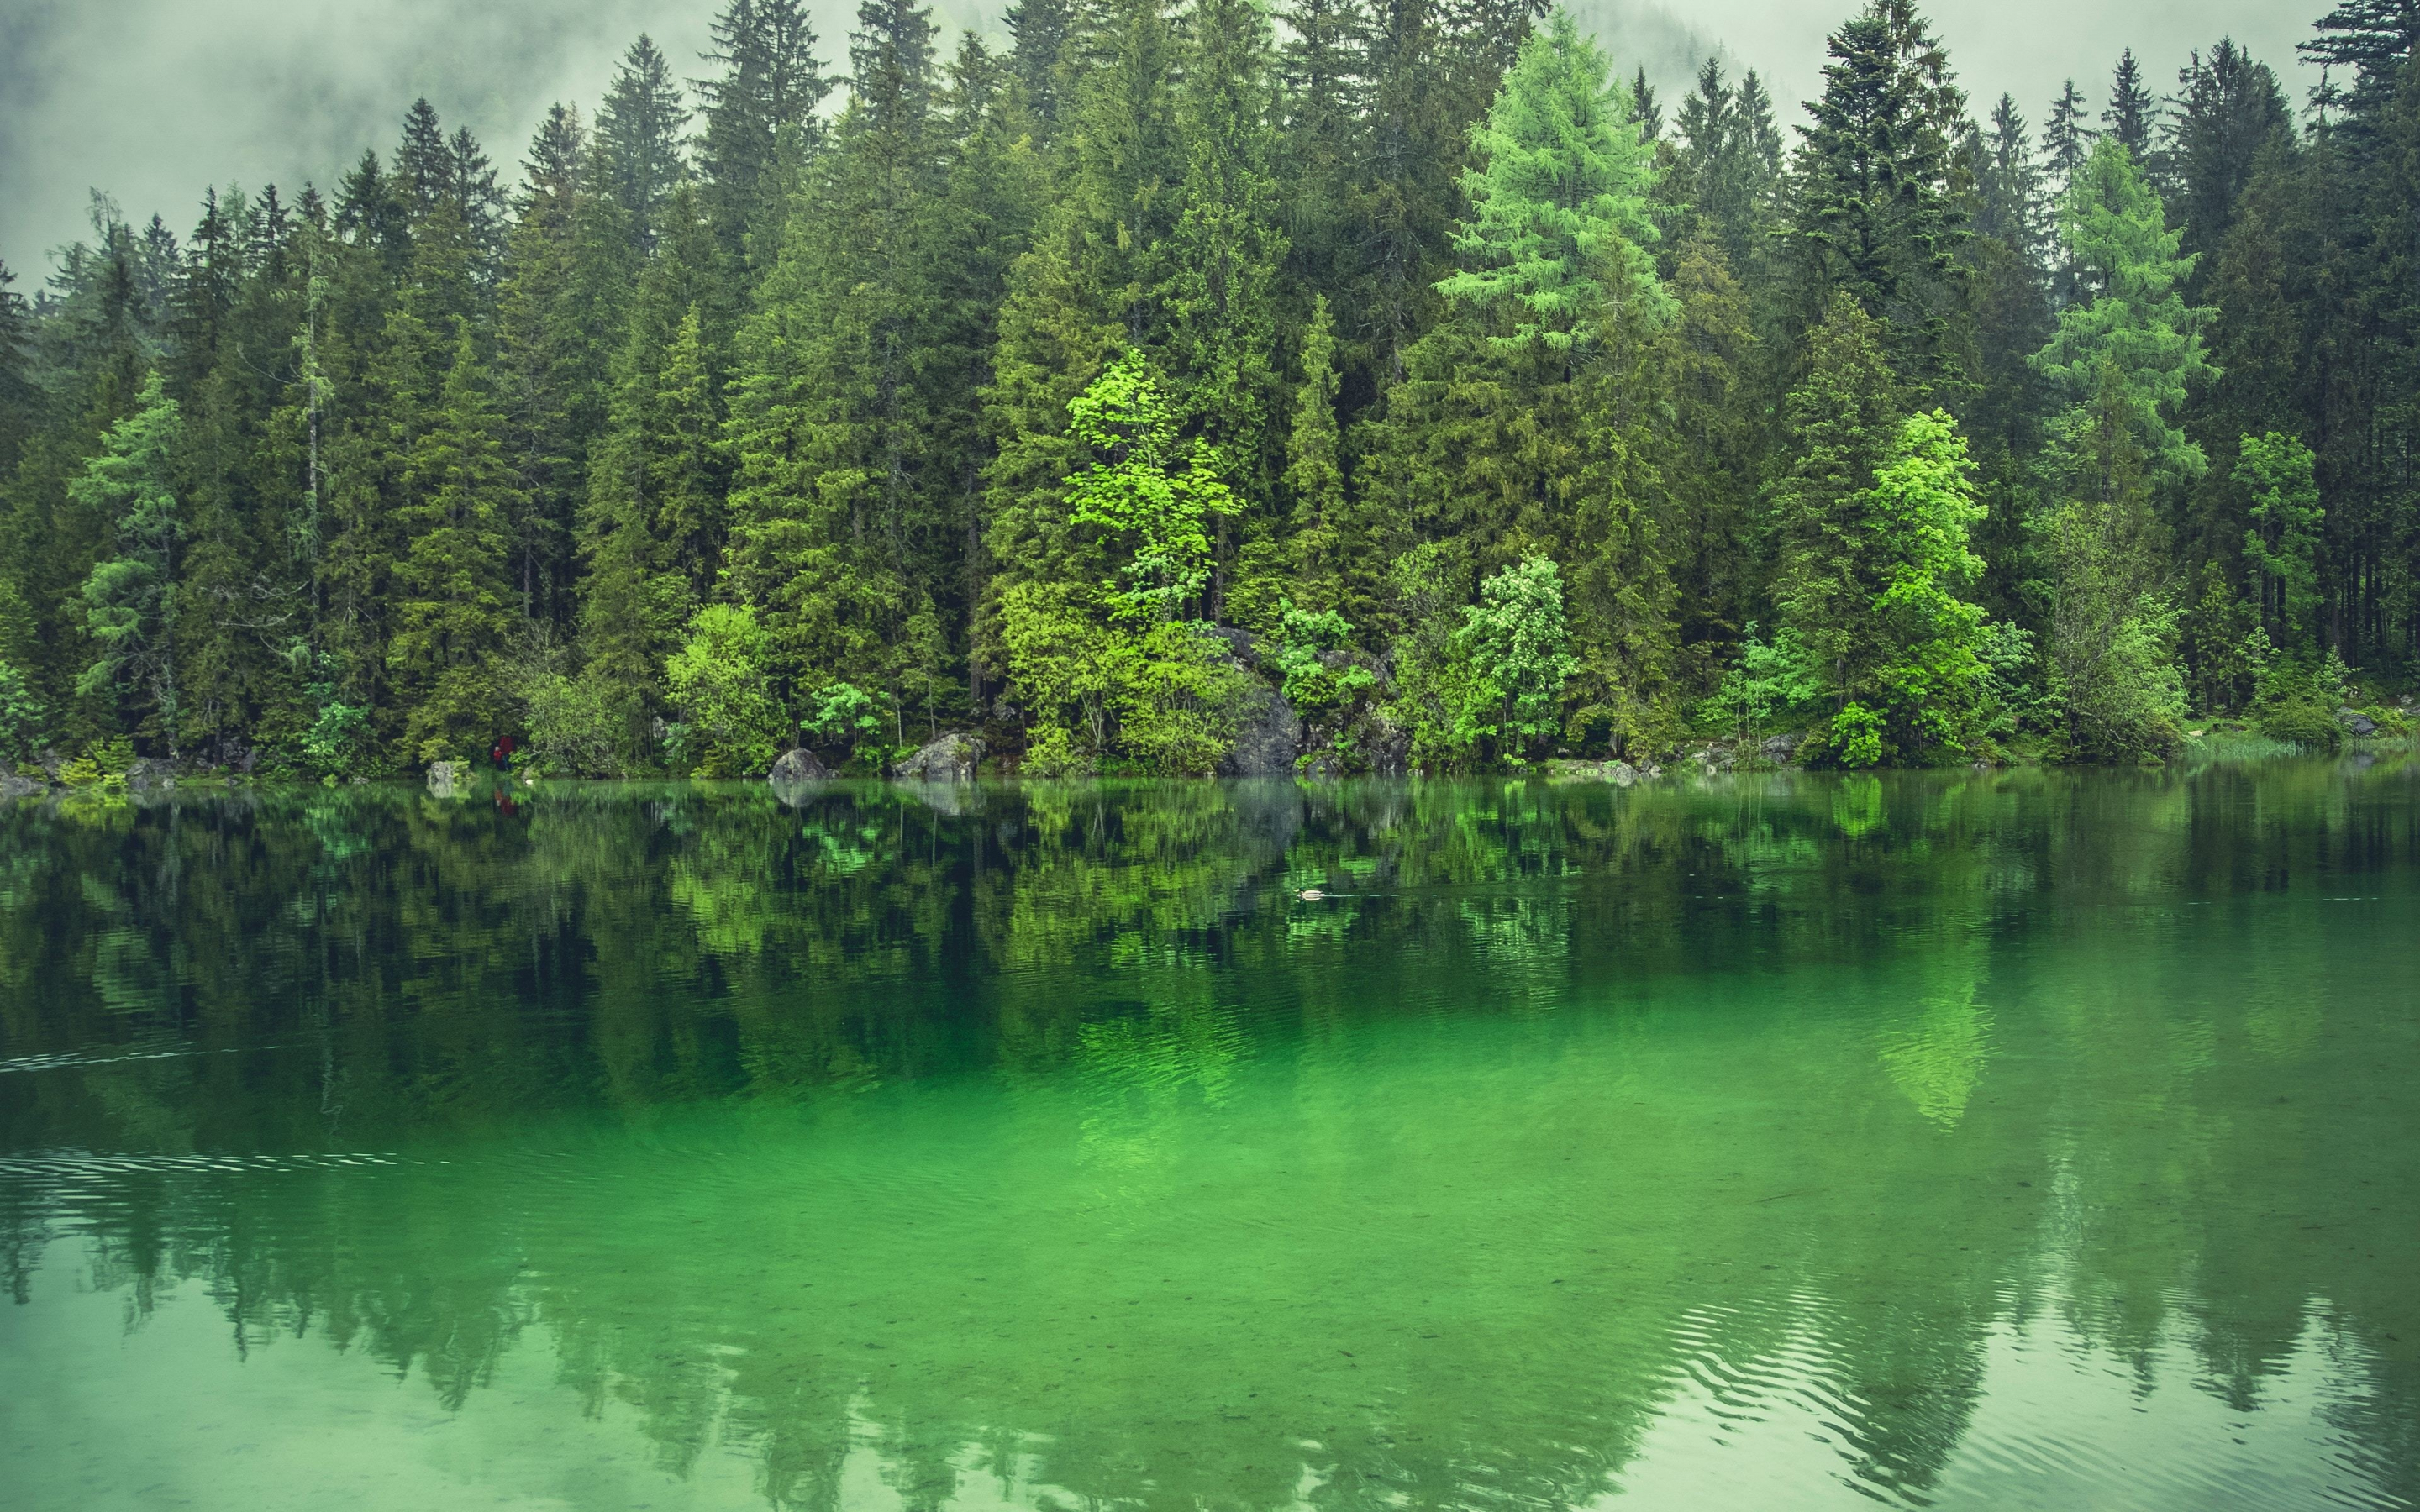 Lake, green water, trees, forest, nature, 2880x1800 wallpaper